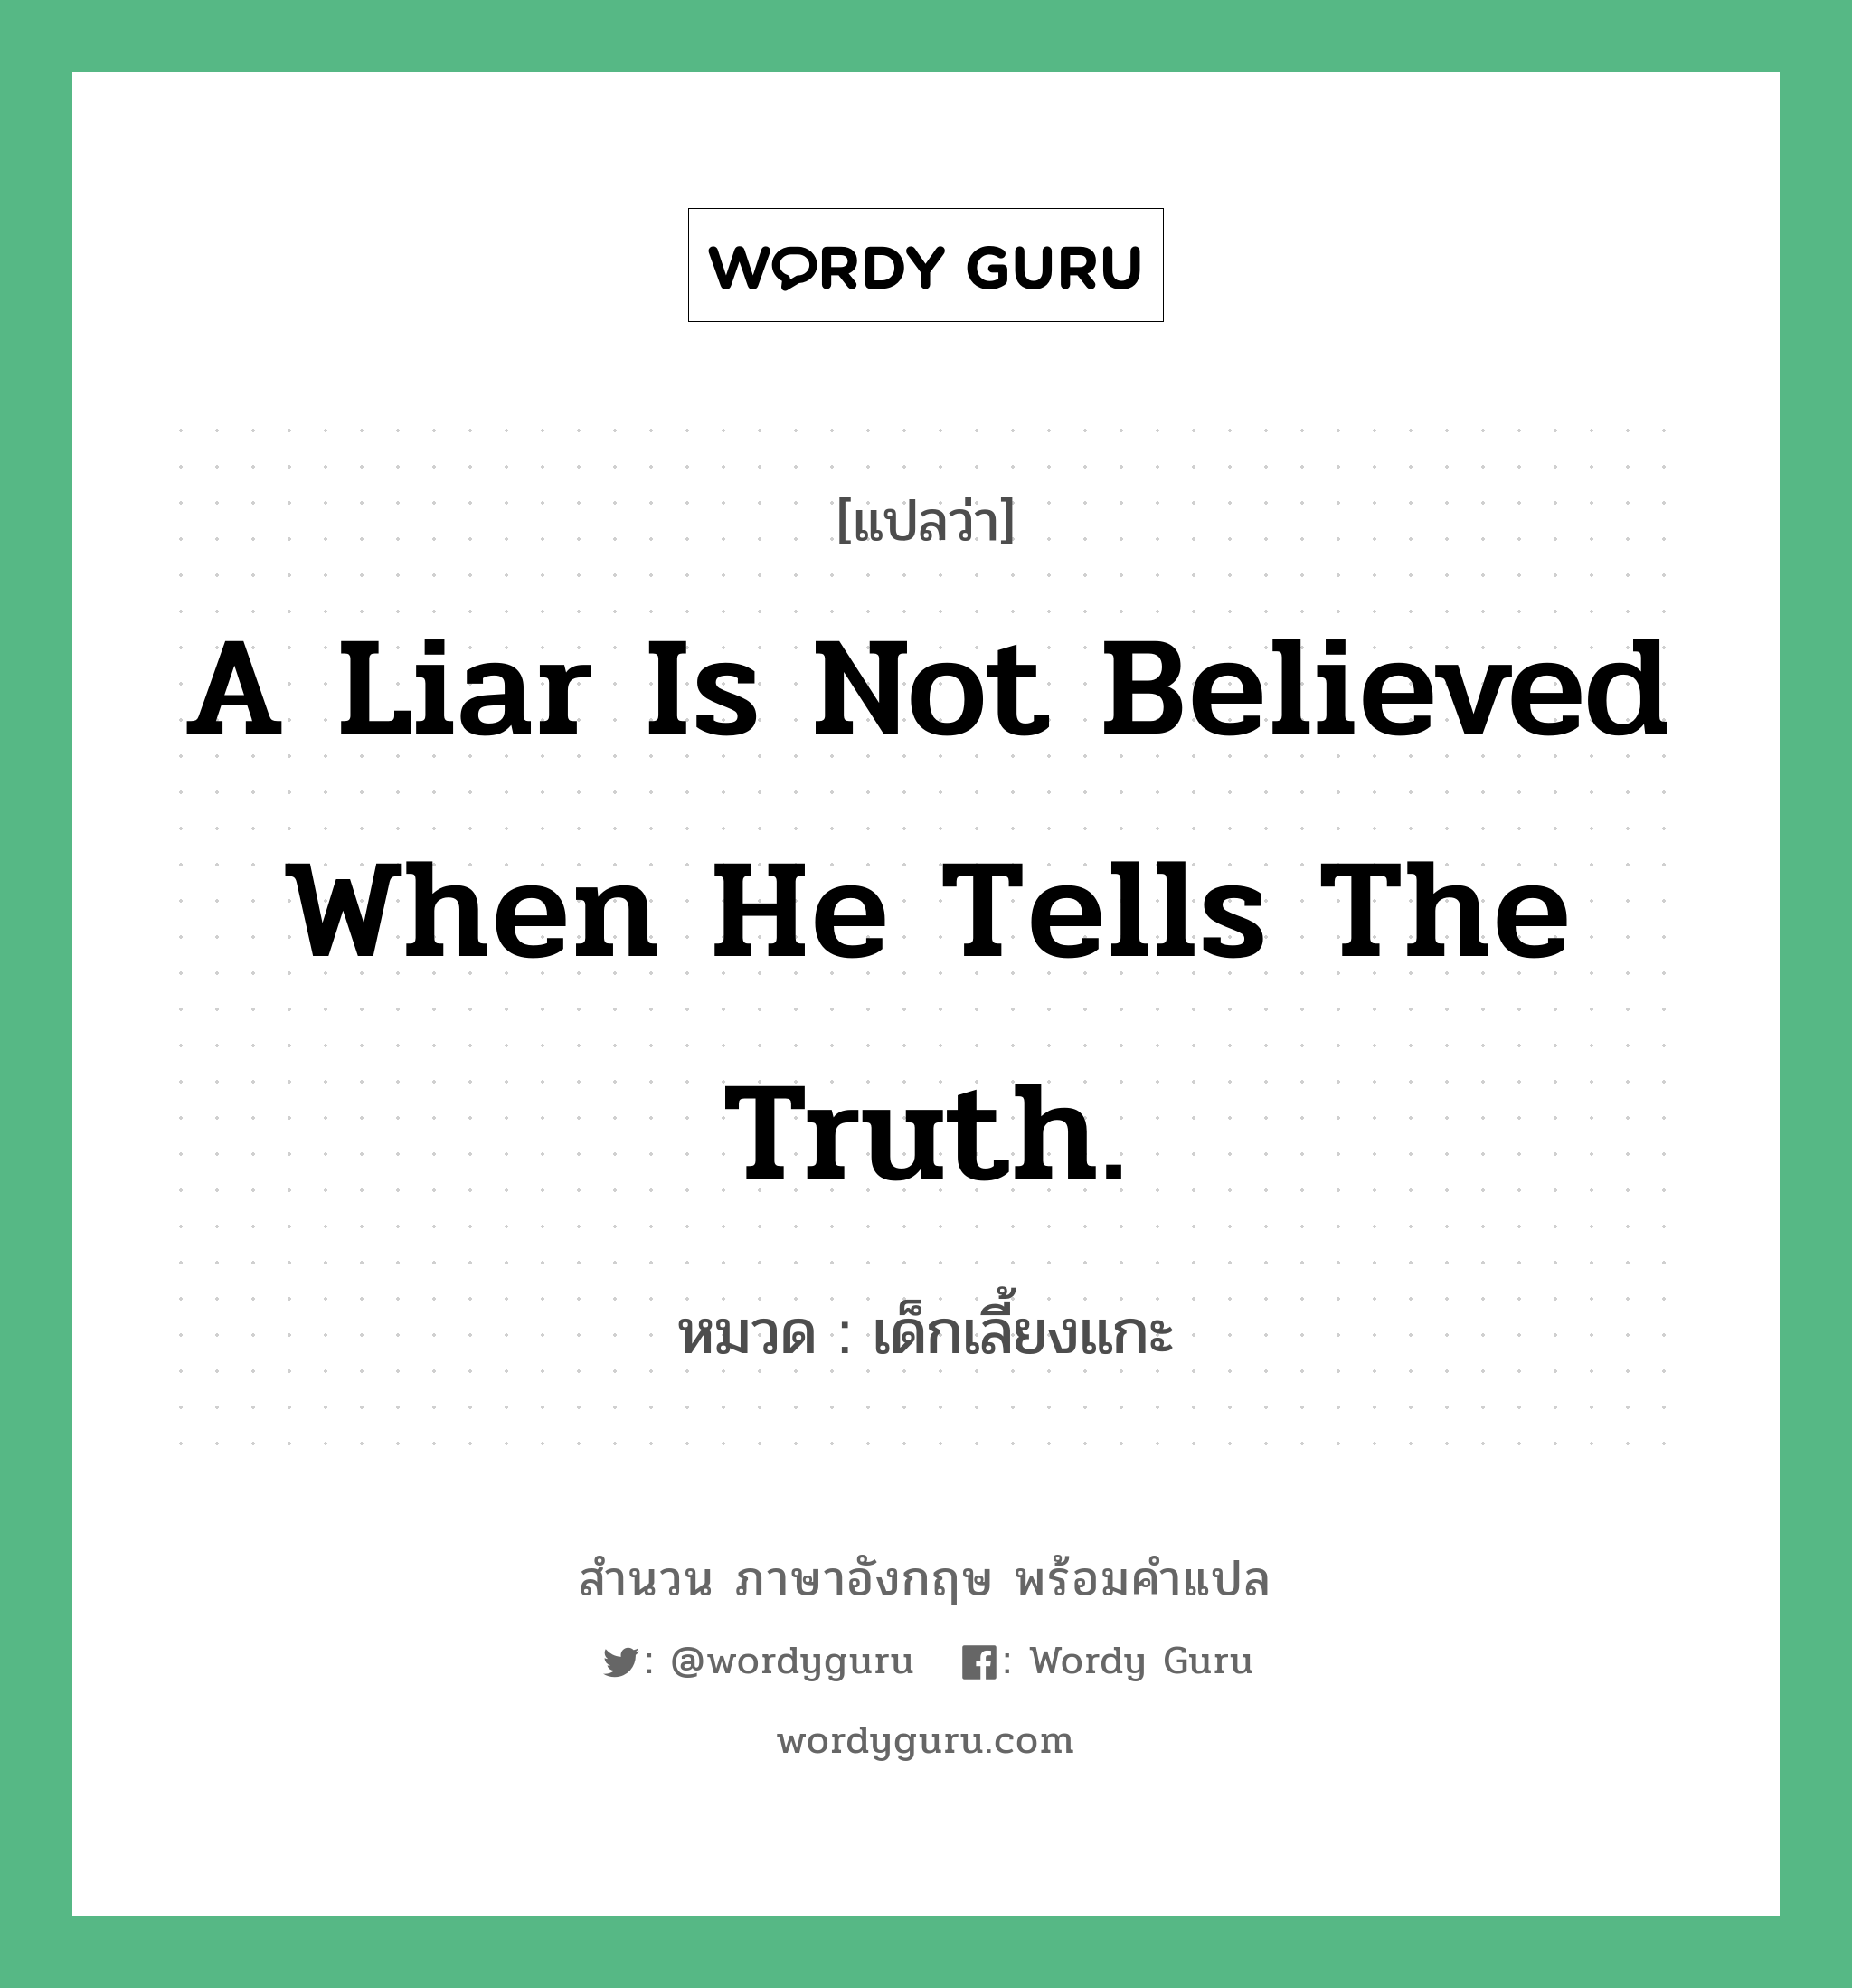 A liar is not believed when he tells the truth. แปลว่า?, สำนวนภาษาอังกฤษ A liar is not believed when he tells the truth. หมวด เด็กเลี้ยงแกะ คำสุภาษิต ภาษาอังกฤษ หมวด คำสุภาษิต ภาษาอังกฤษ